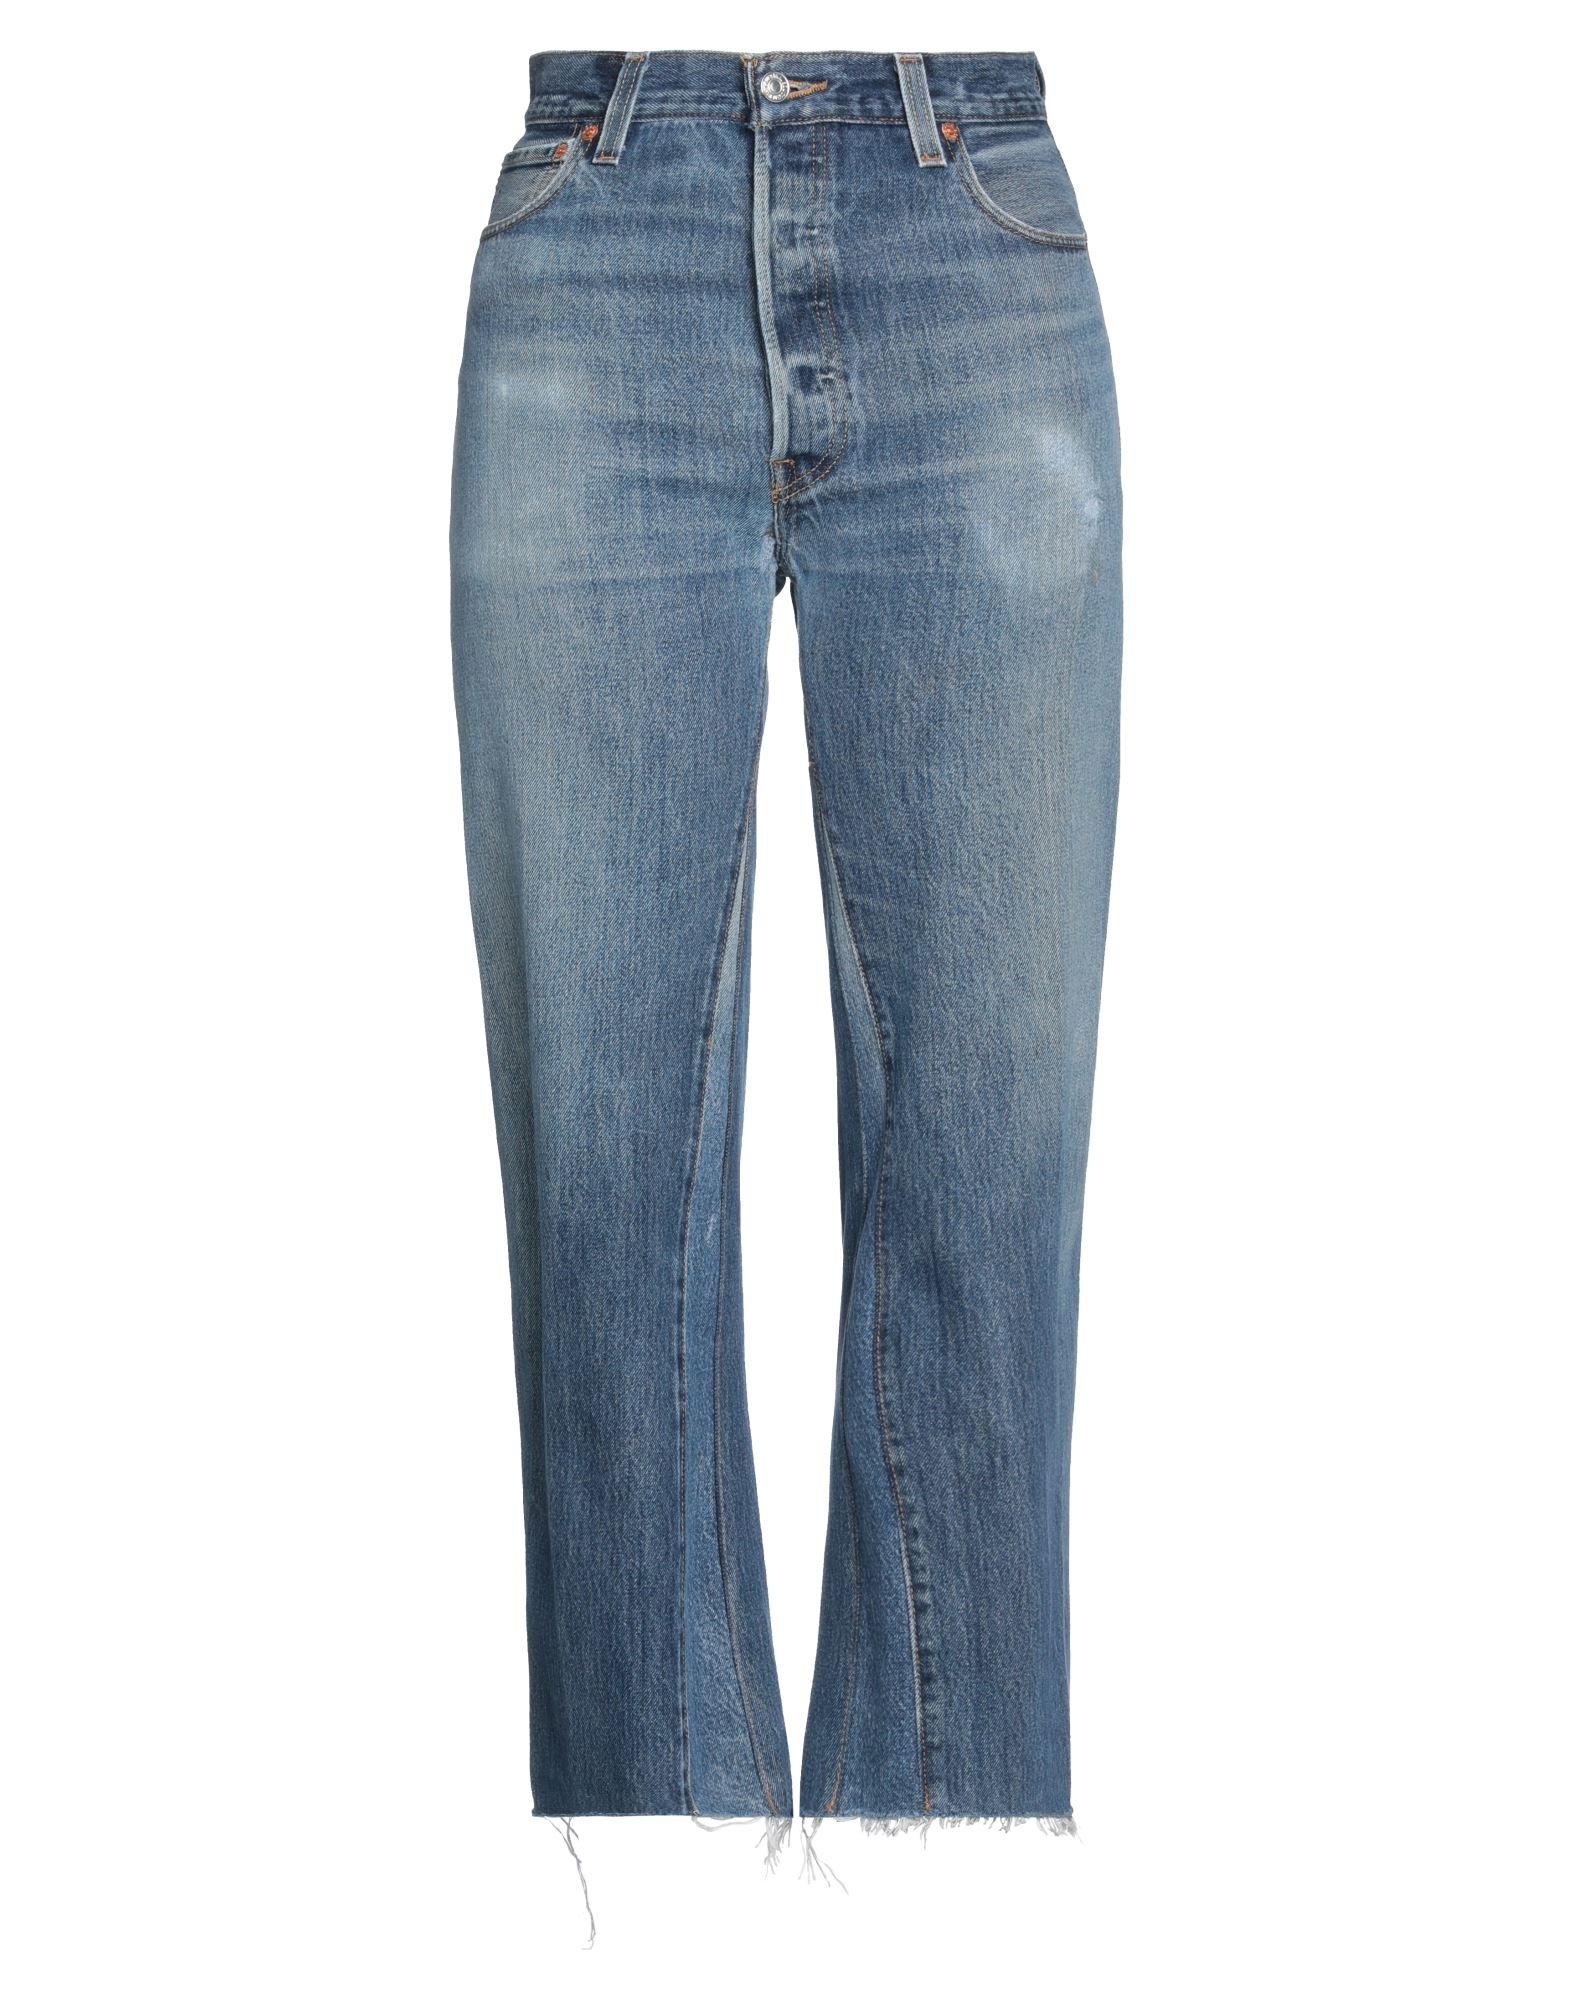 RE/DONE with LEVI'S Jeanshose Damen Blau von RE/DONE with LEVI'S